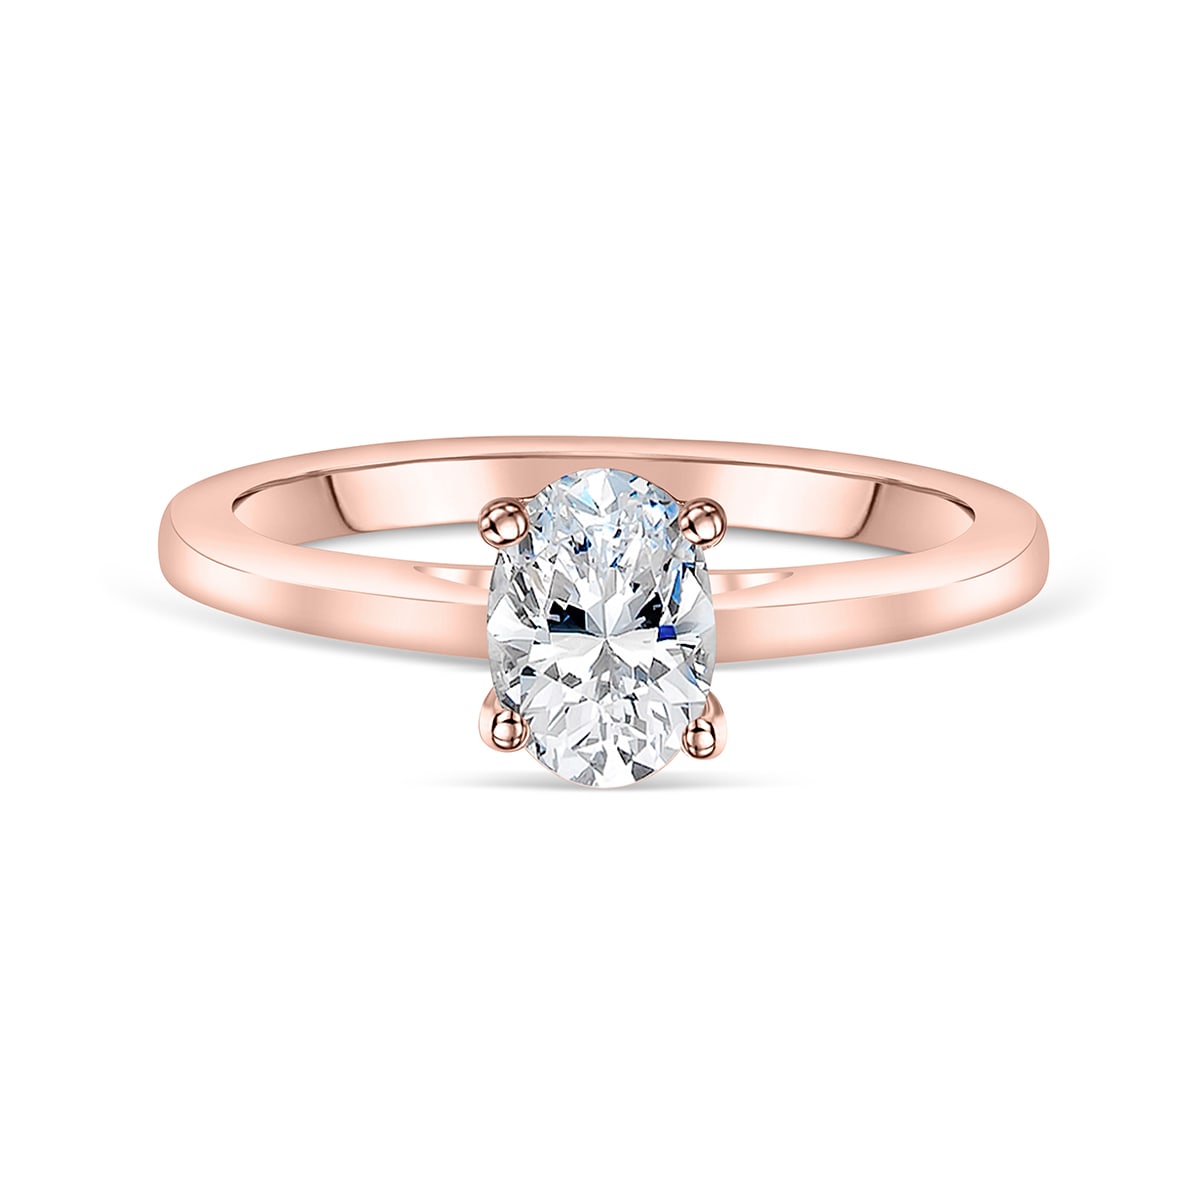 the ava rose gold oval wedding ring